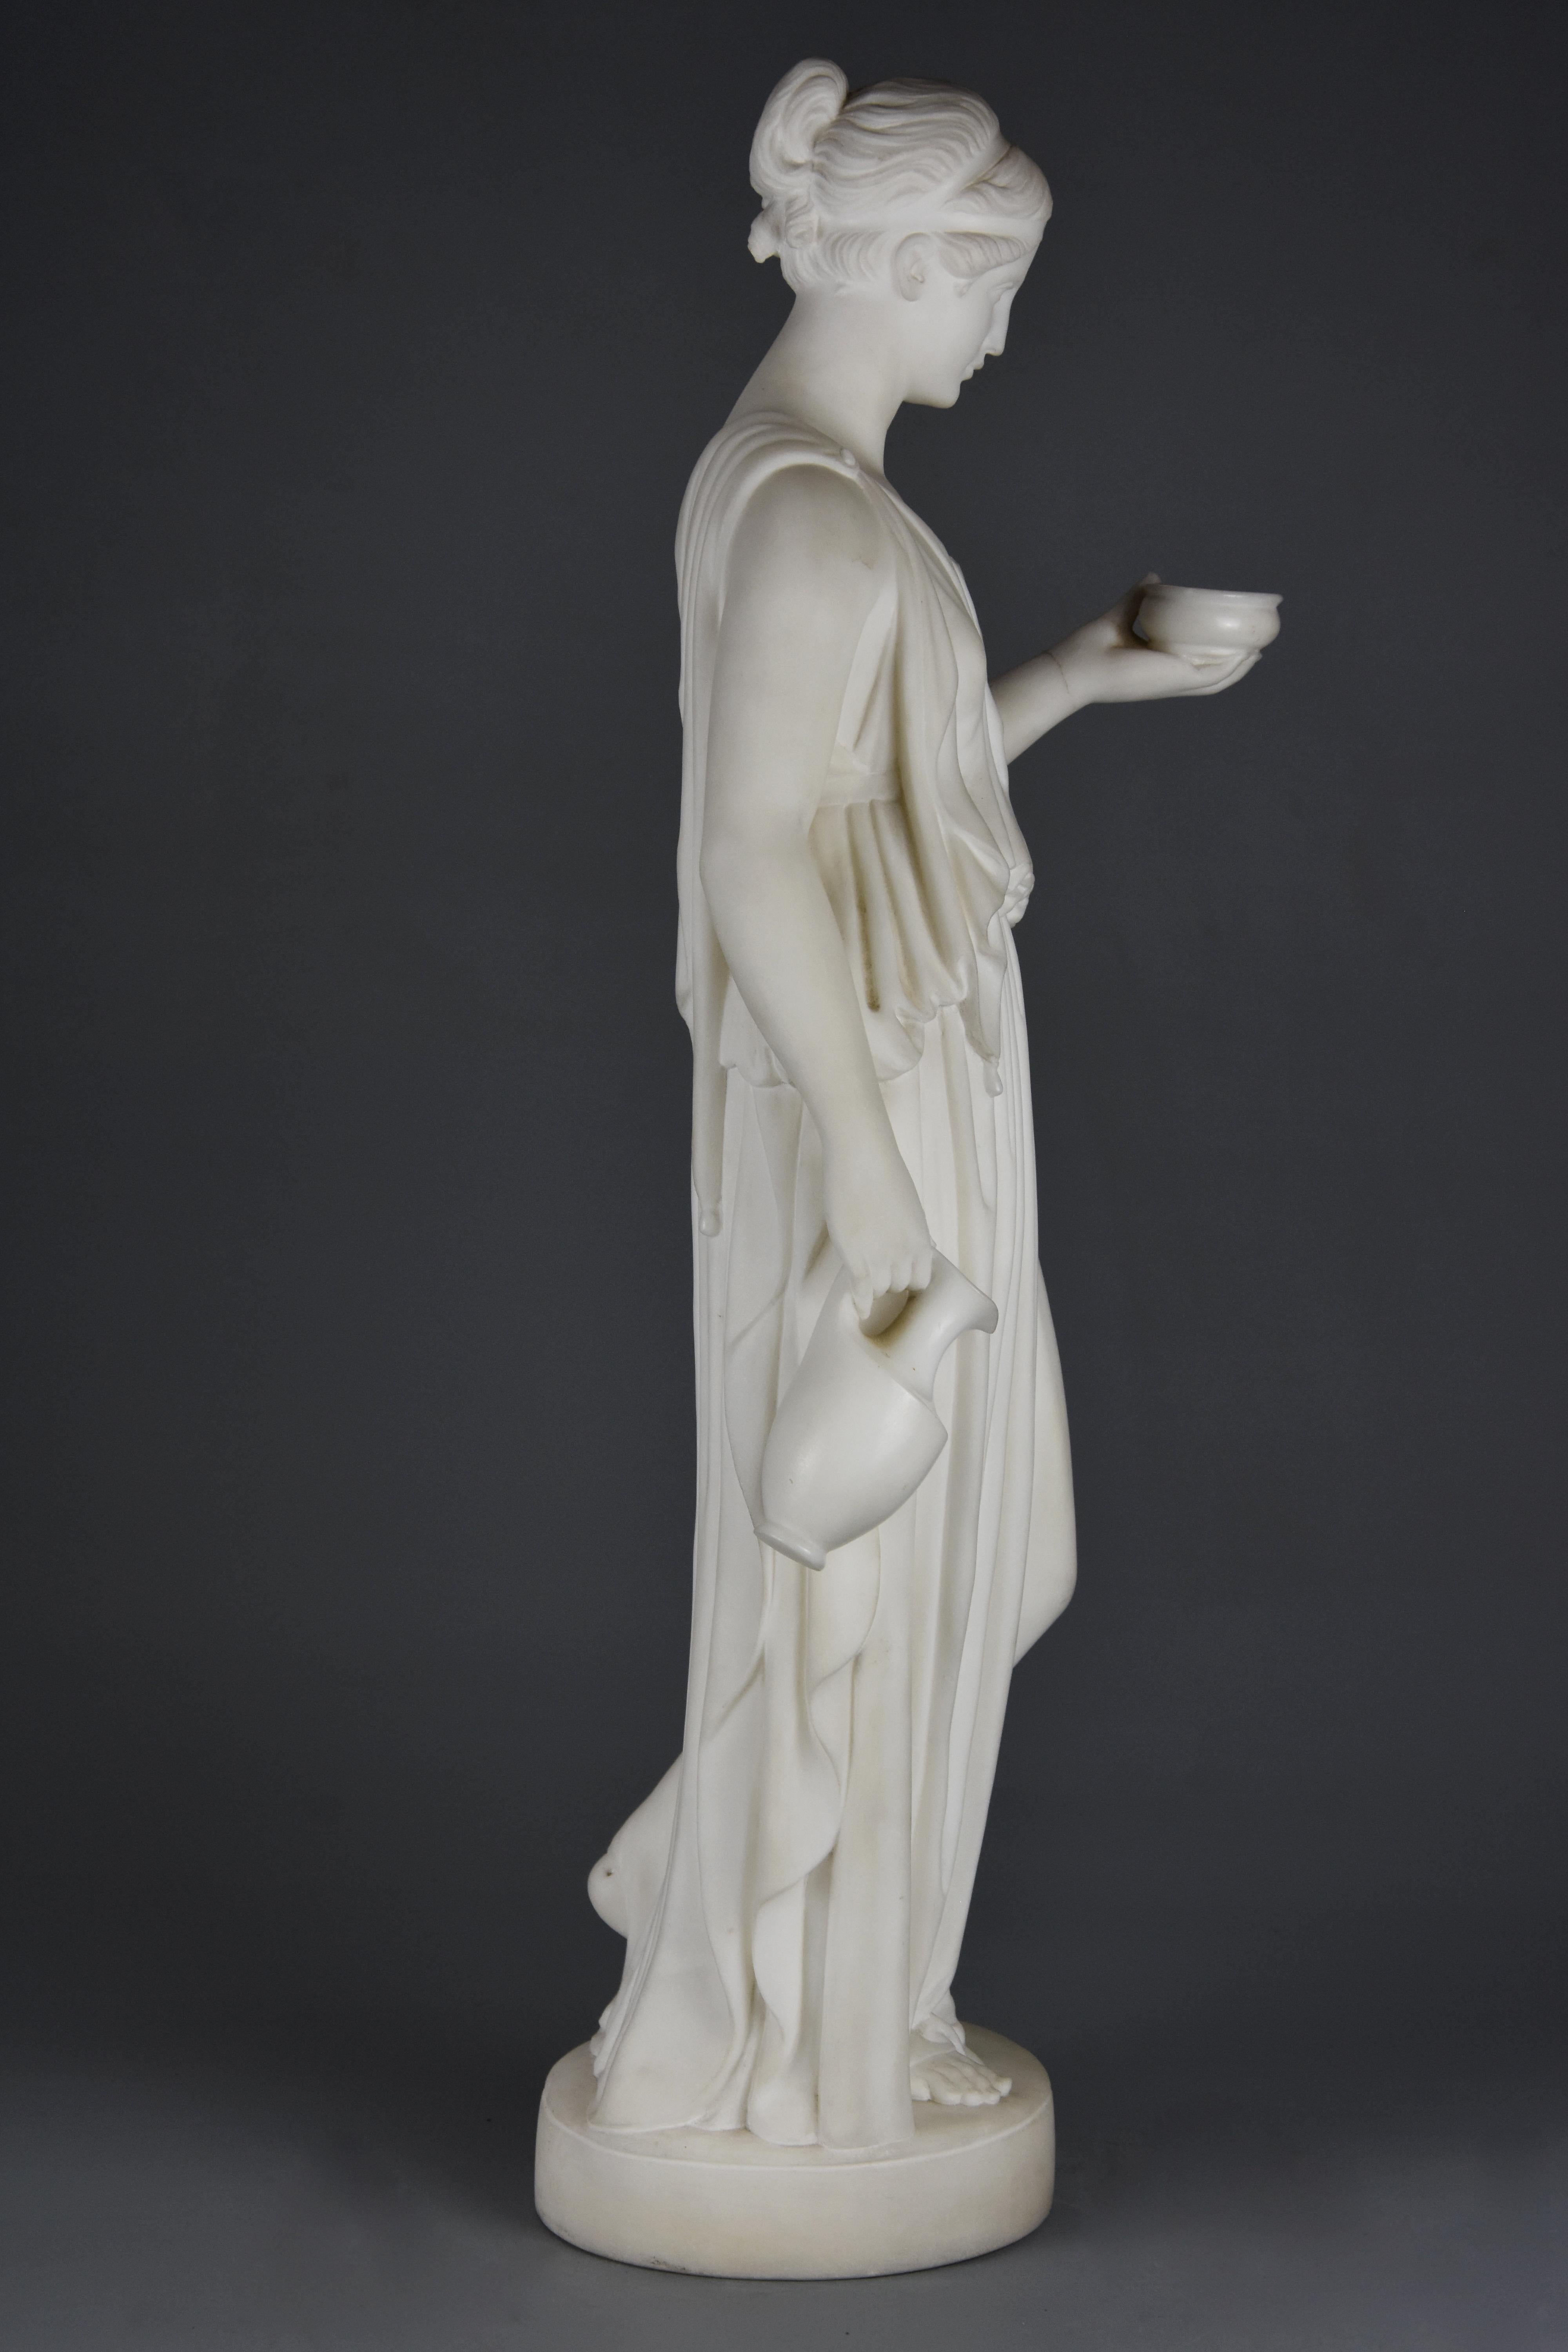 Fine Quality Mid-19th Century Carved Marble Figure of Hebe, Goddess of Youth 5